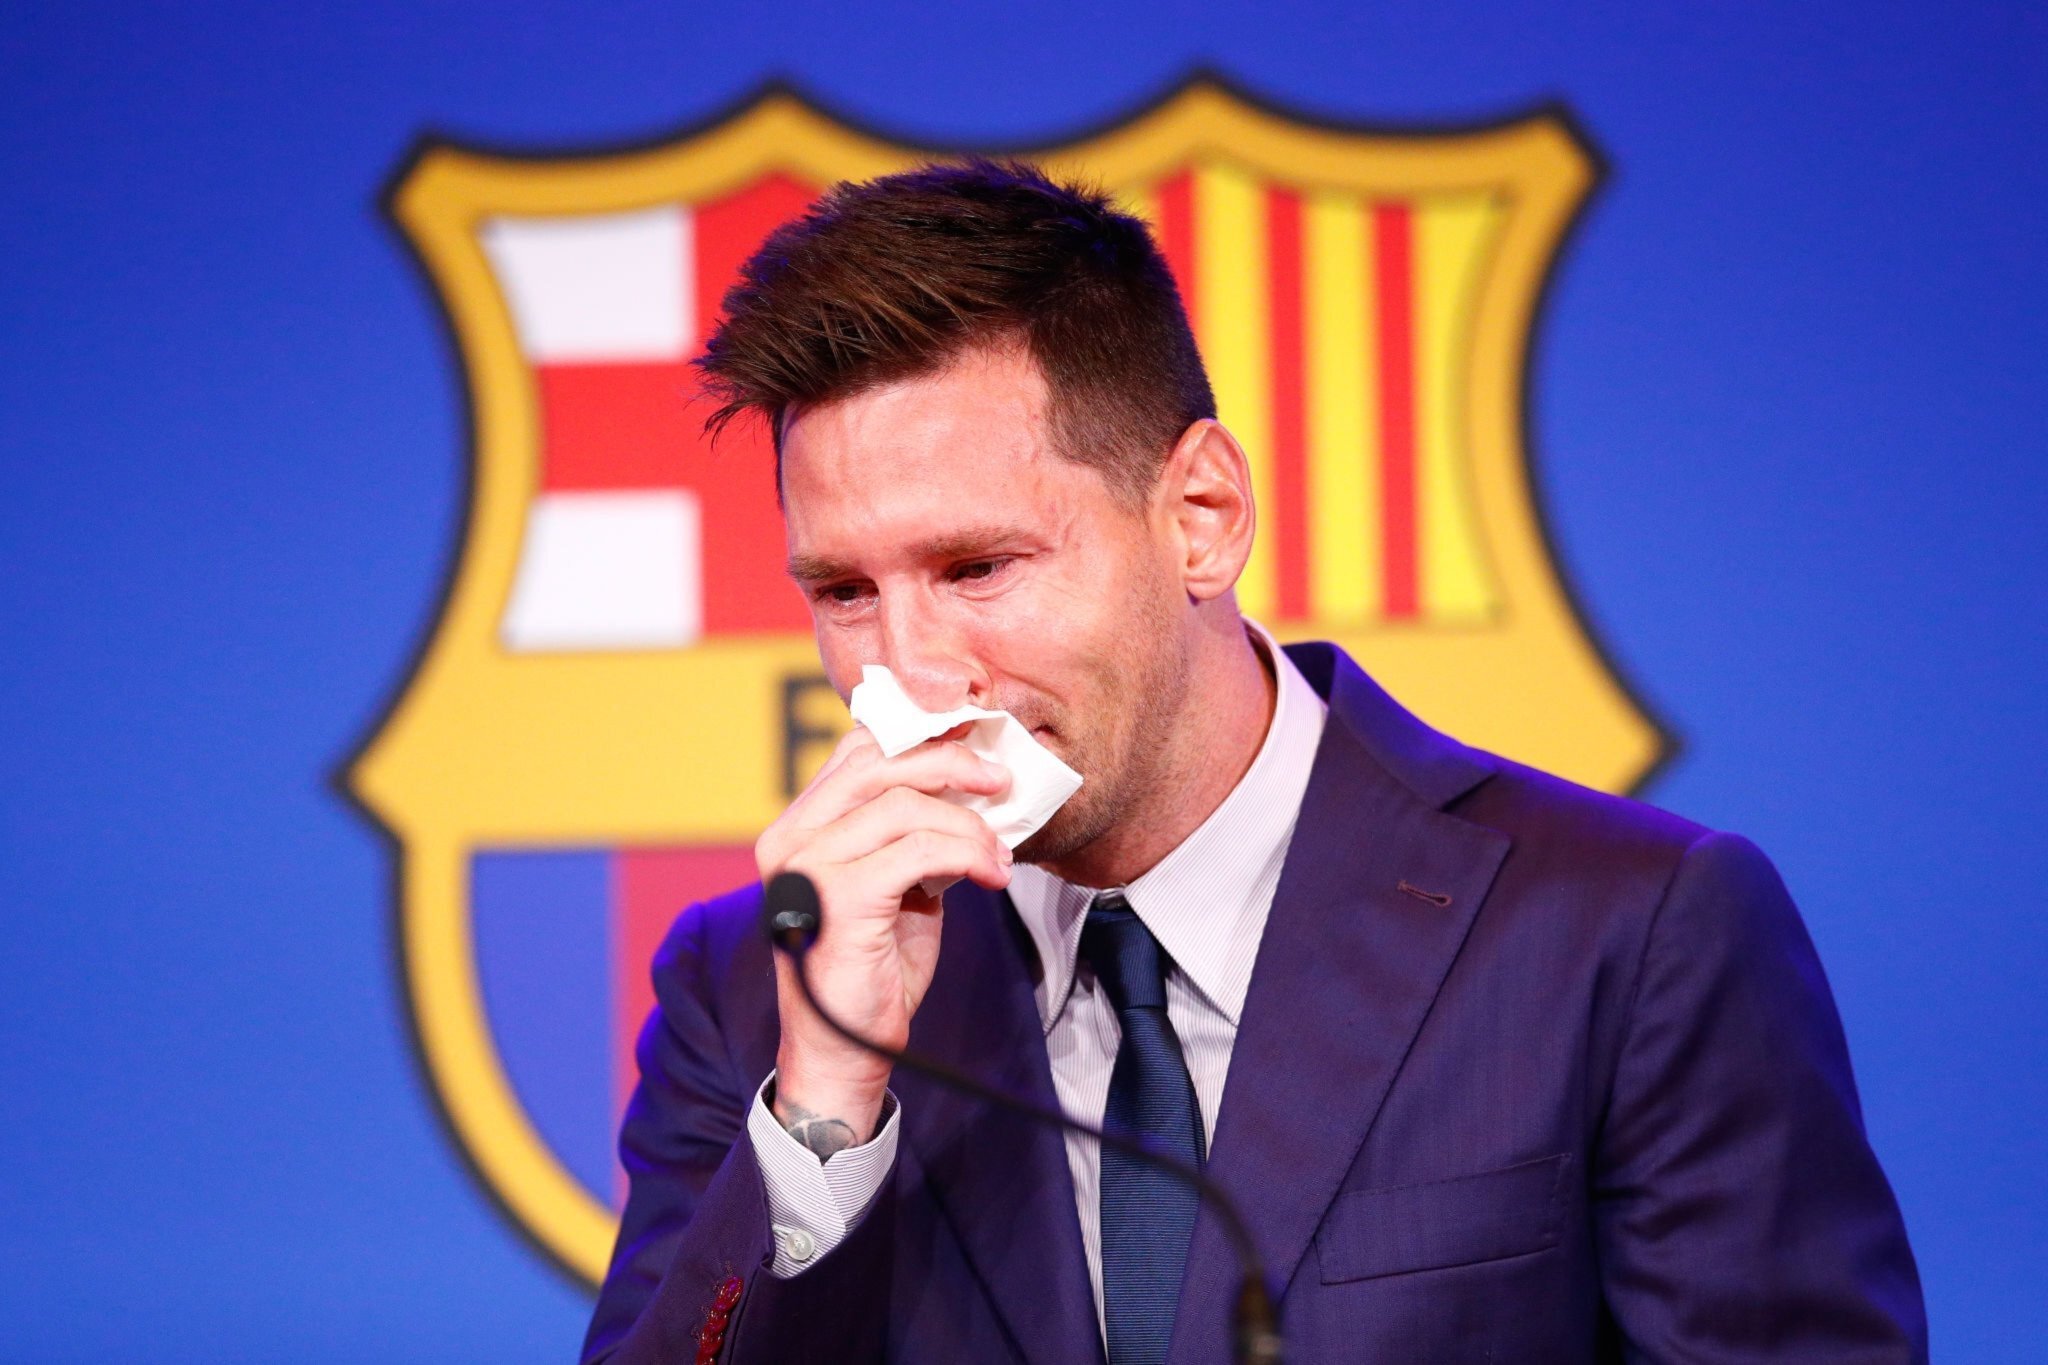 Messi bids emotional farewell to his home Barcelona, breaks down during his speech